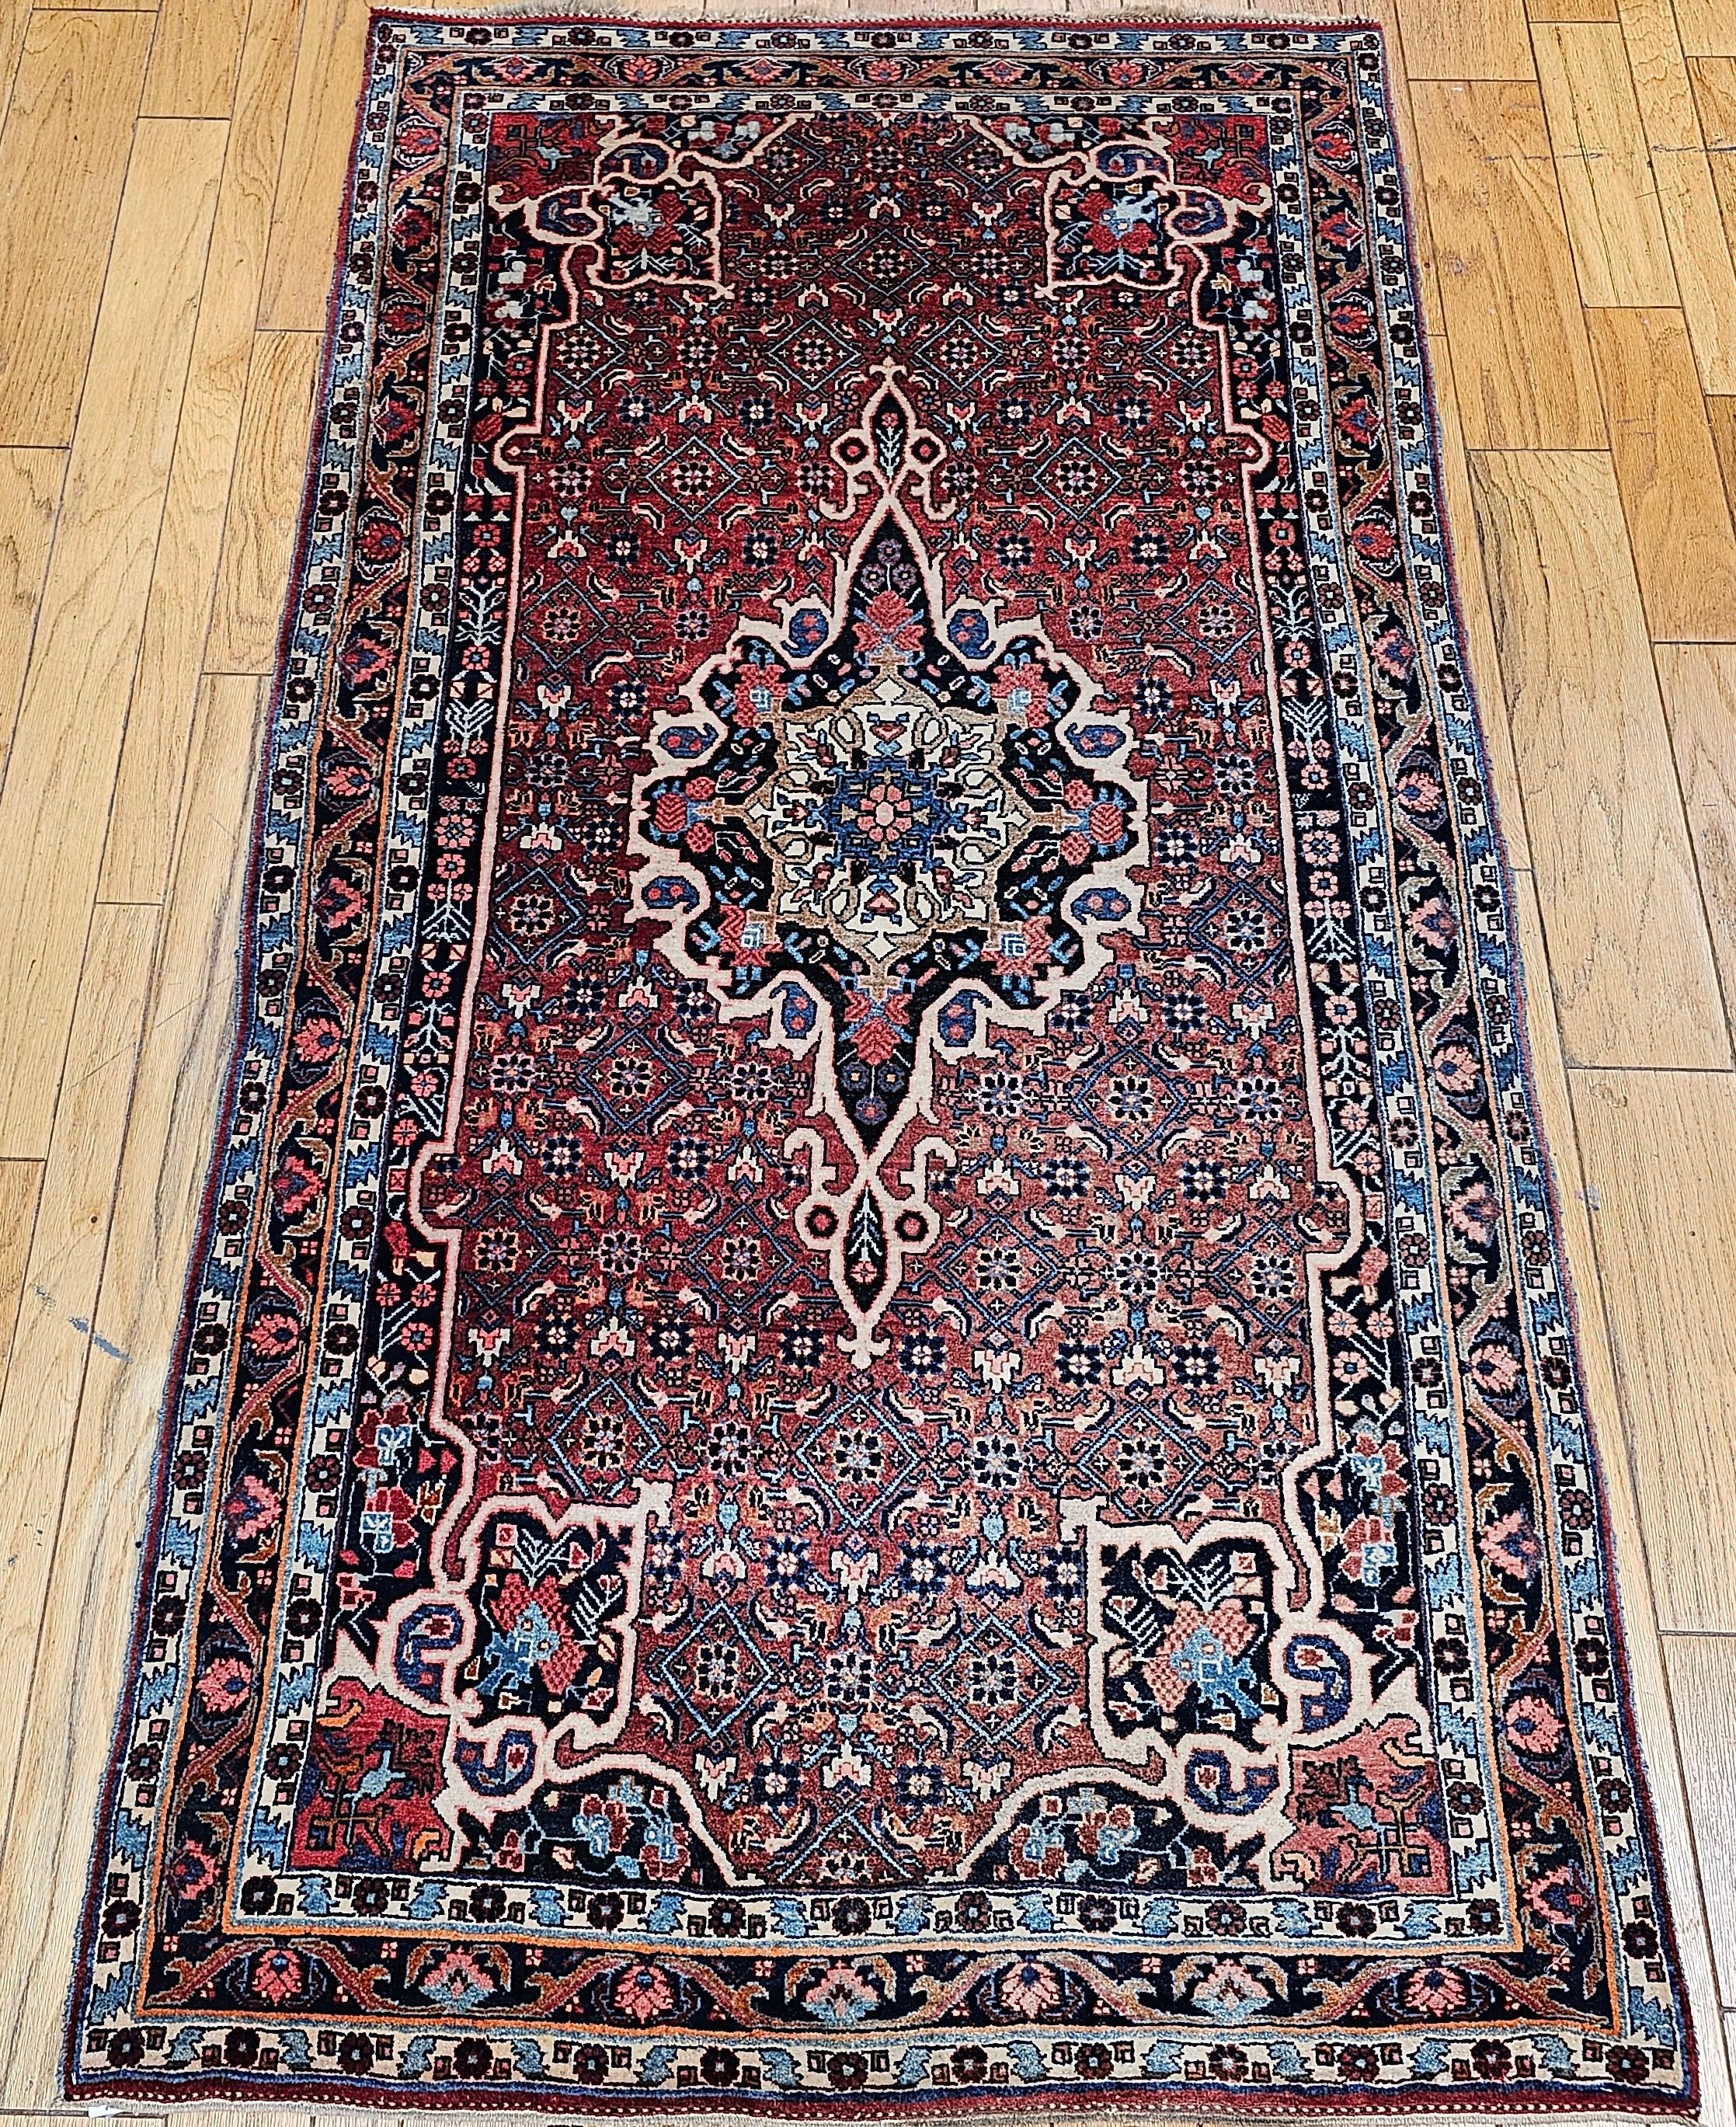  Vintage Persian Bidjar (Bijar) gallery (corridor) rug in a medallion floral pattern was woven in the early 1900s.  The Bidjar (Bijar) rug has a red or rust color field with a Herati geometric design.  The field design accent colors include green,